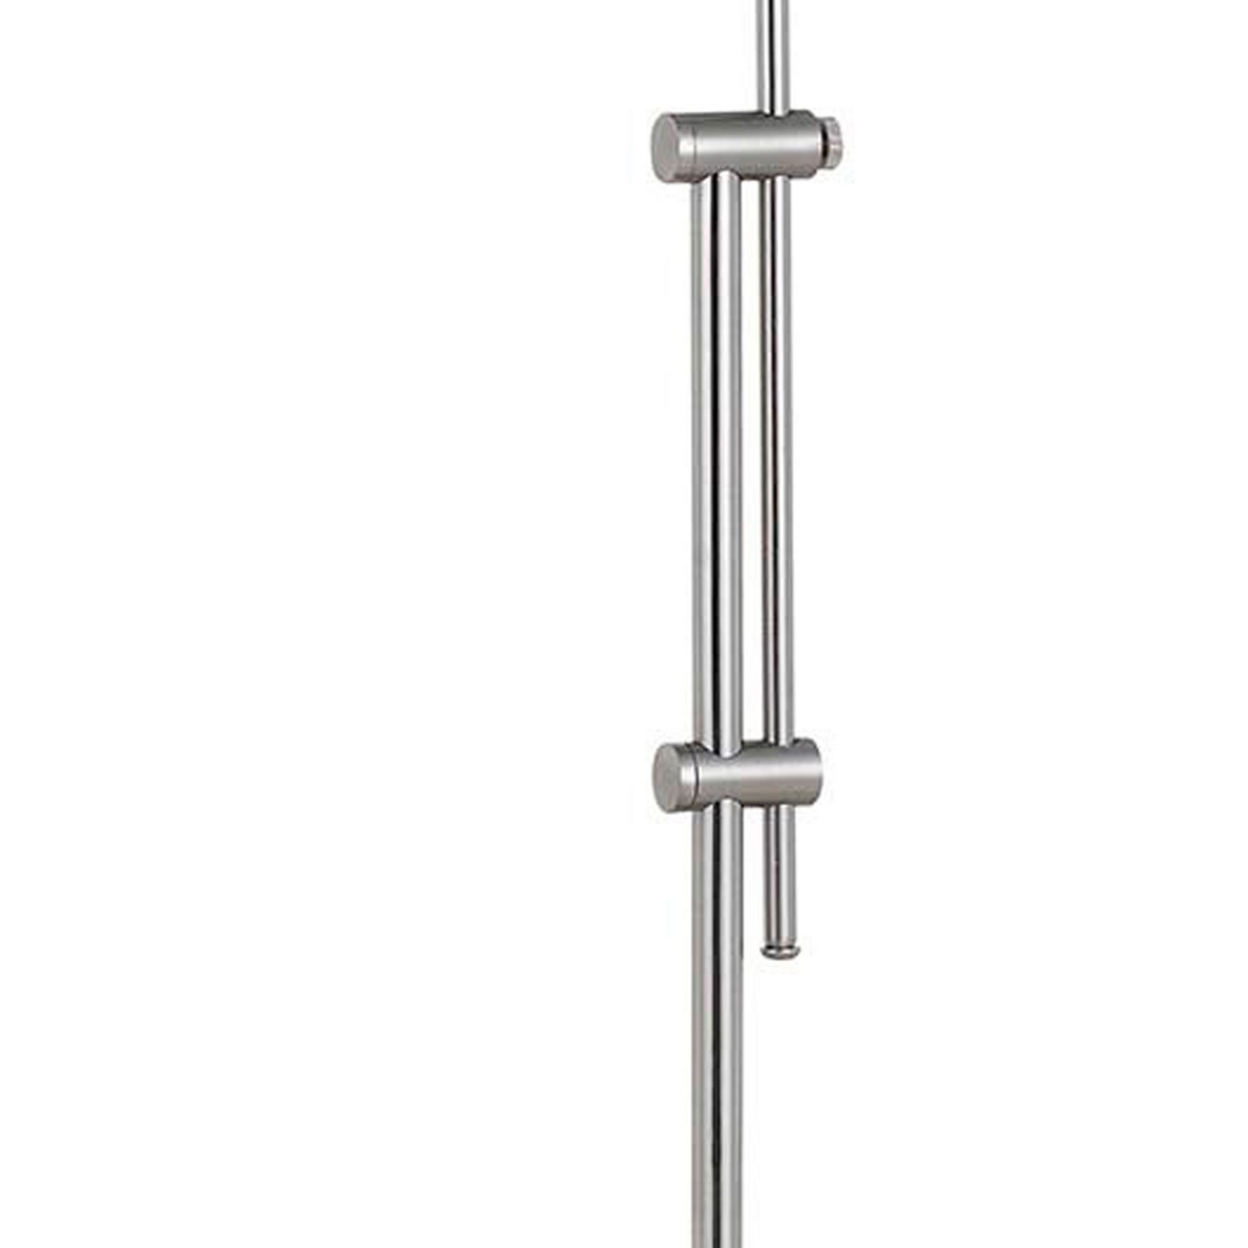 Adjustable Height Metal Pharmacy Lamp With Pull Chain Switch, Silver- Saltoro Sherpi